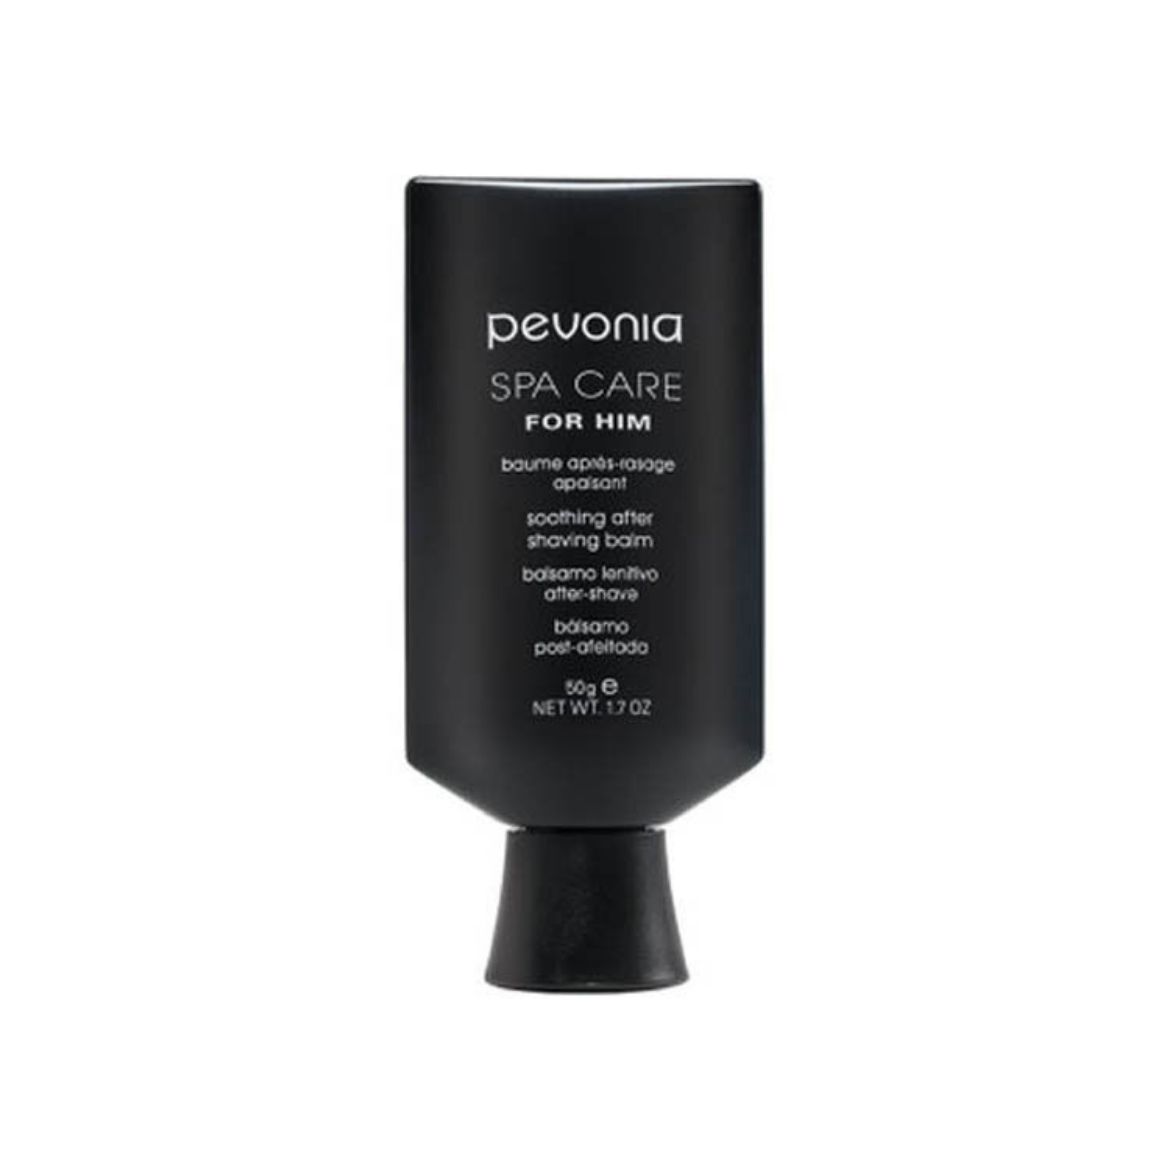 Image of Pevonia Mens' Soothing After Shaving Balm (50ml)